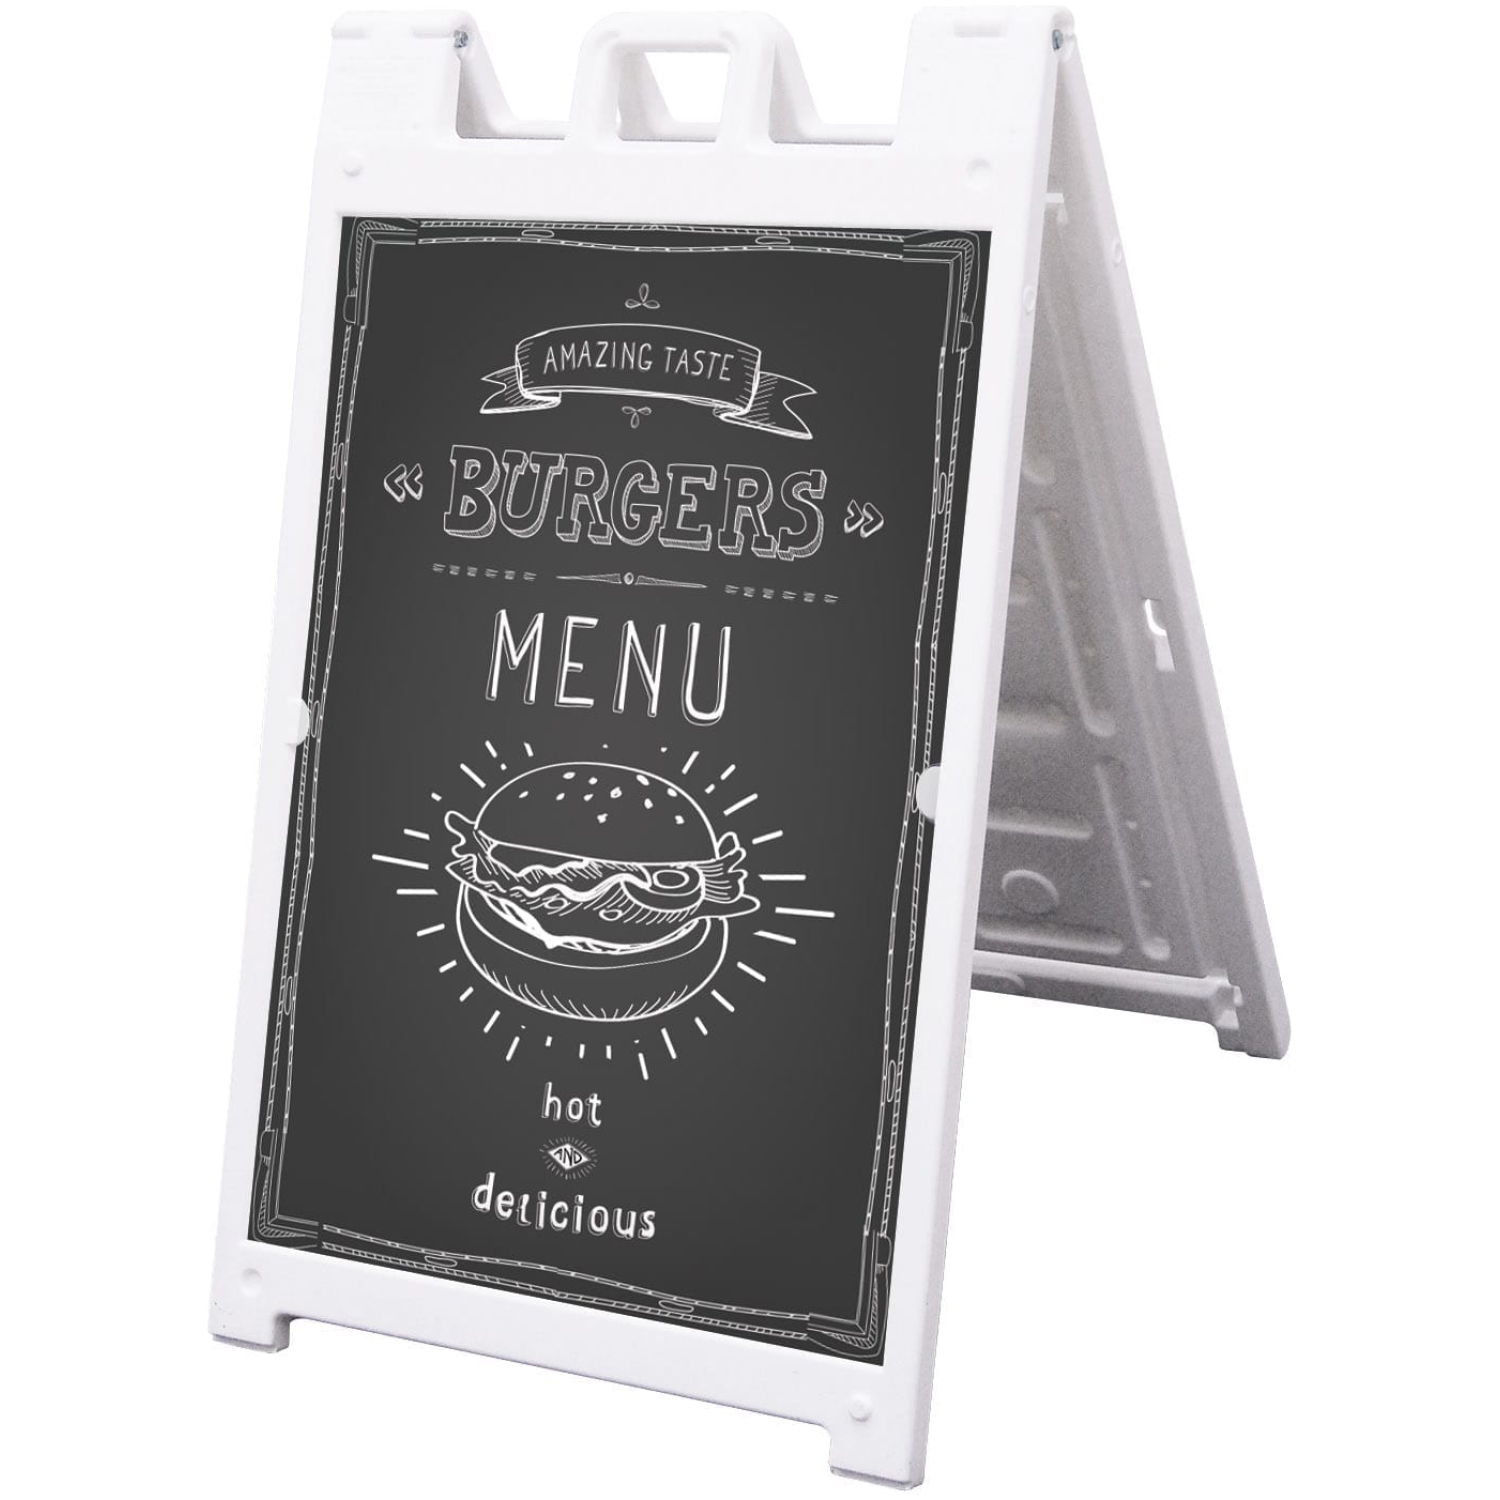 Signicade Deluxe A-frame Chalkboard Kit